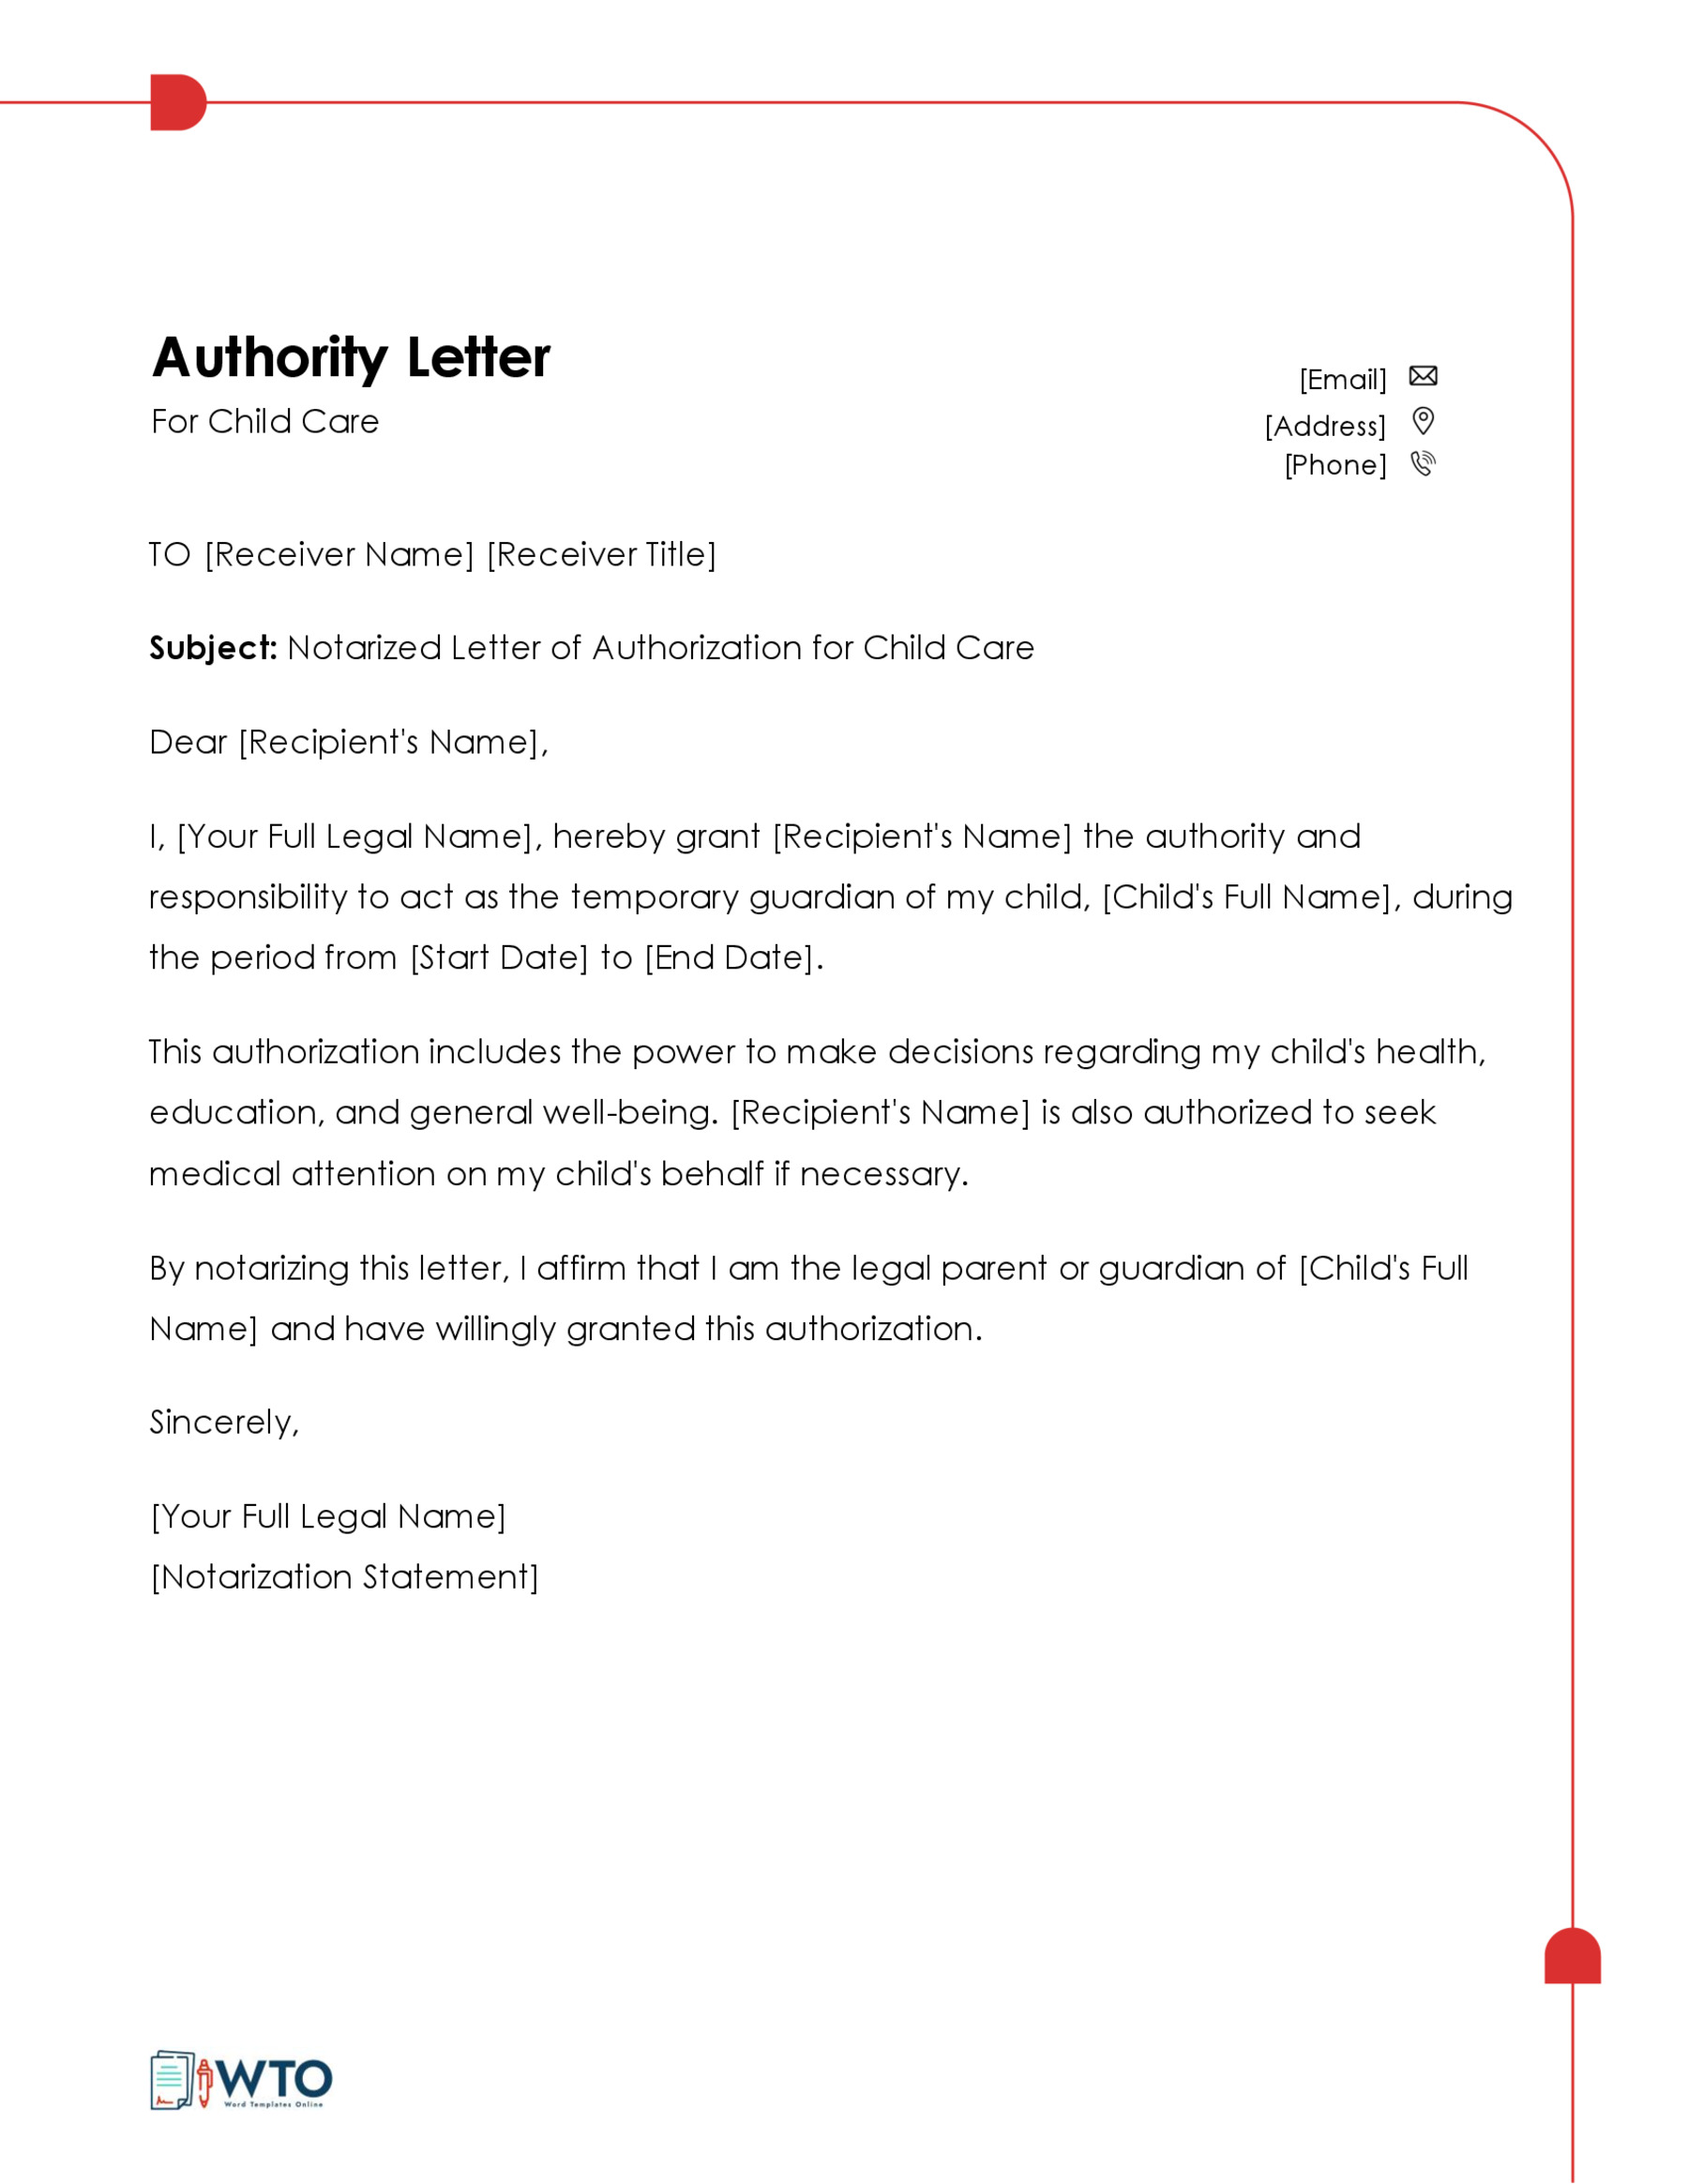 Notarized letter of authorization tamplate-Free Download